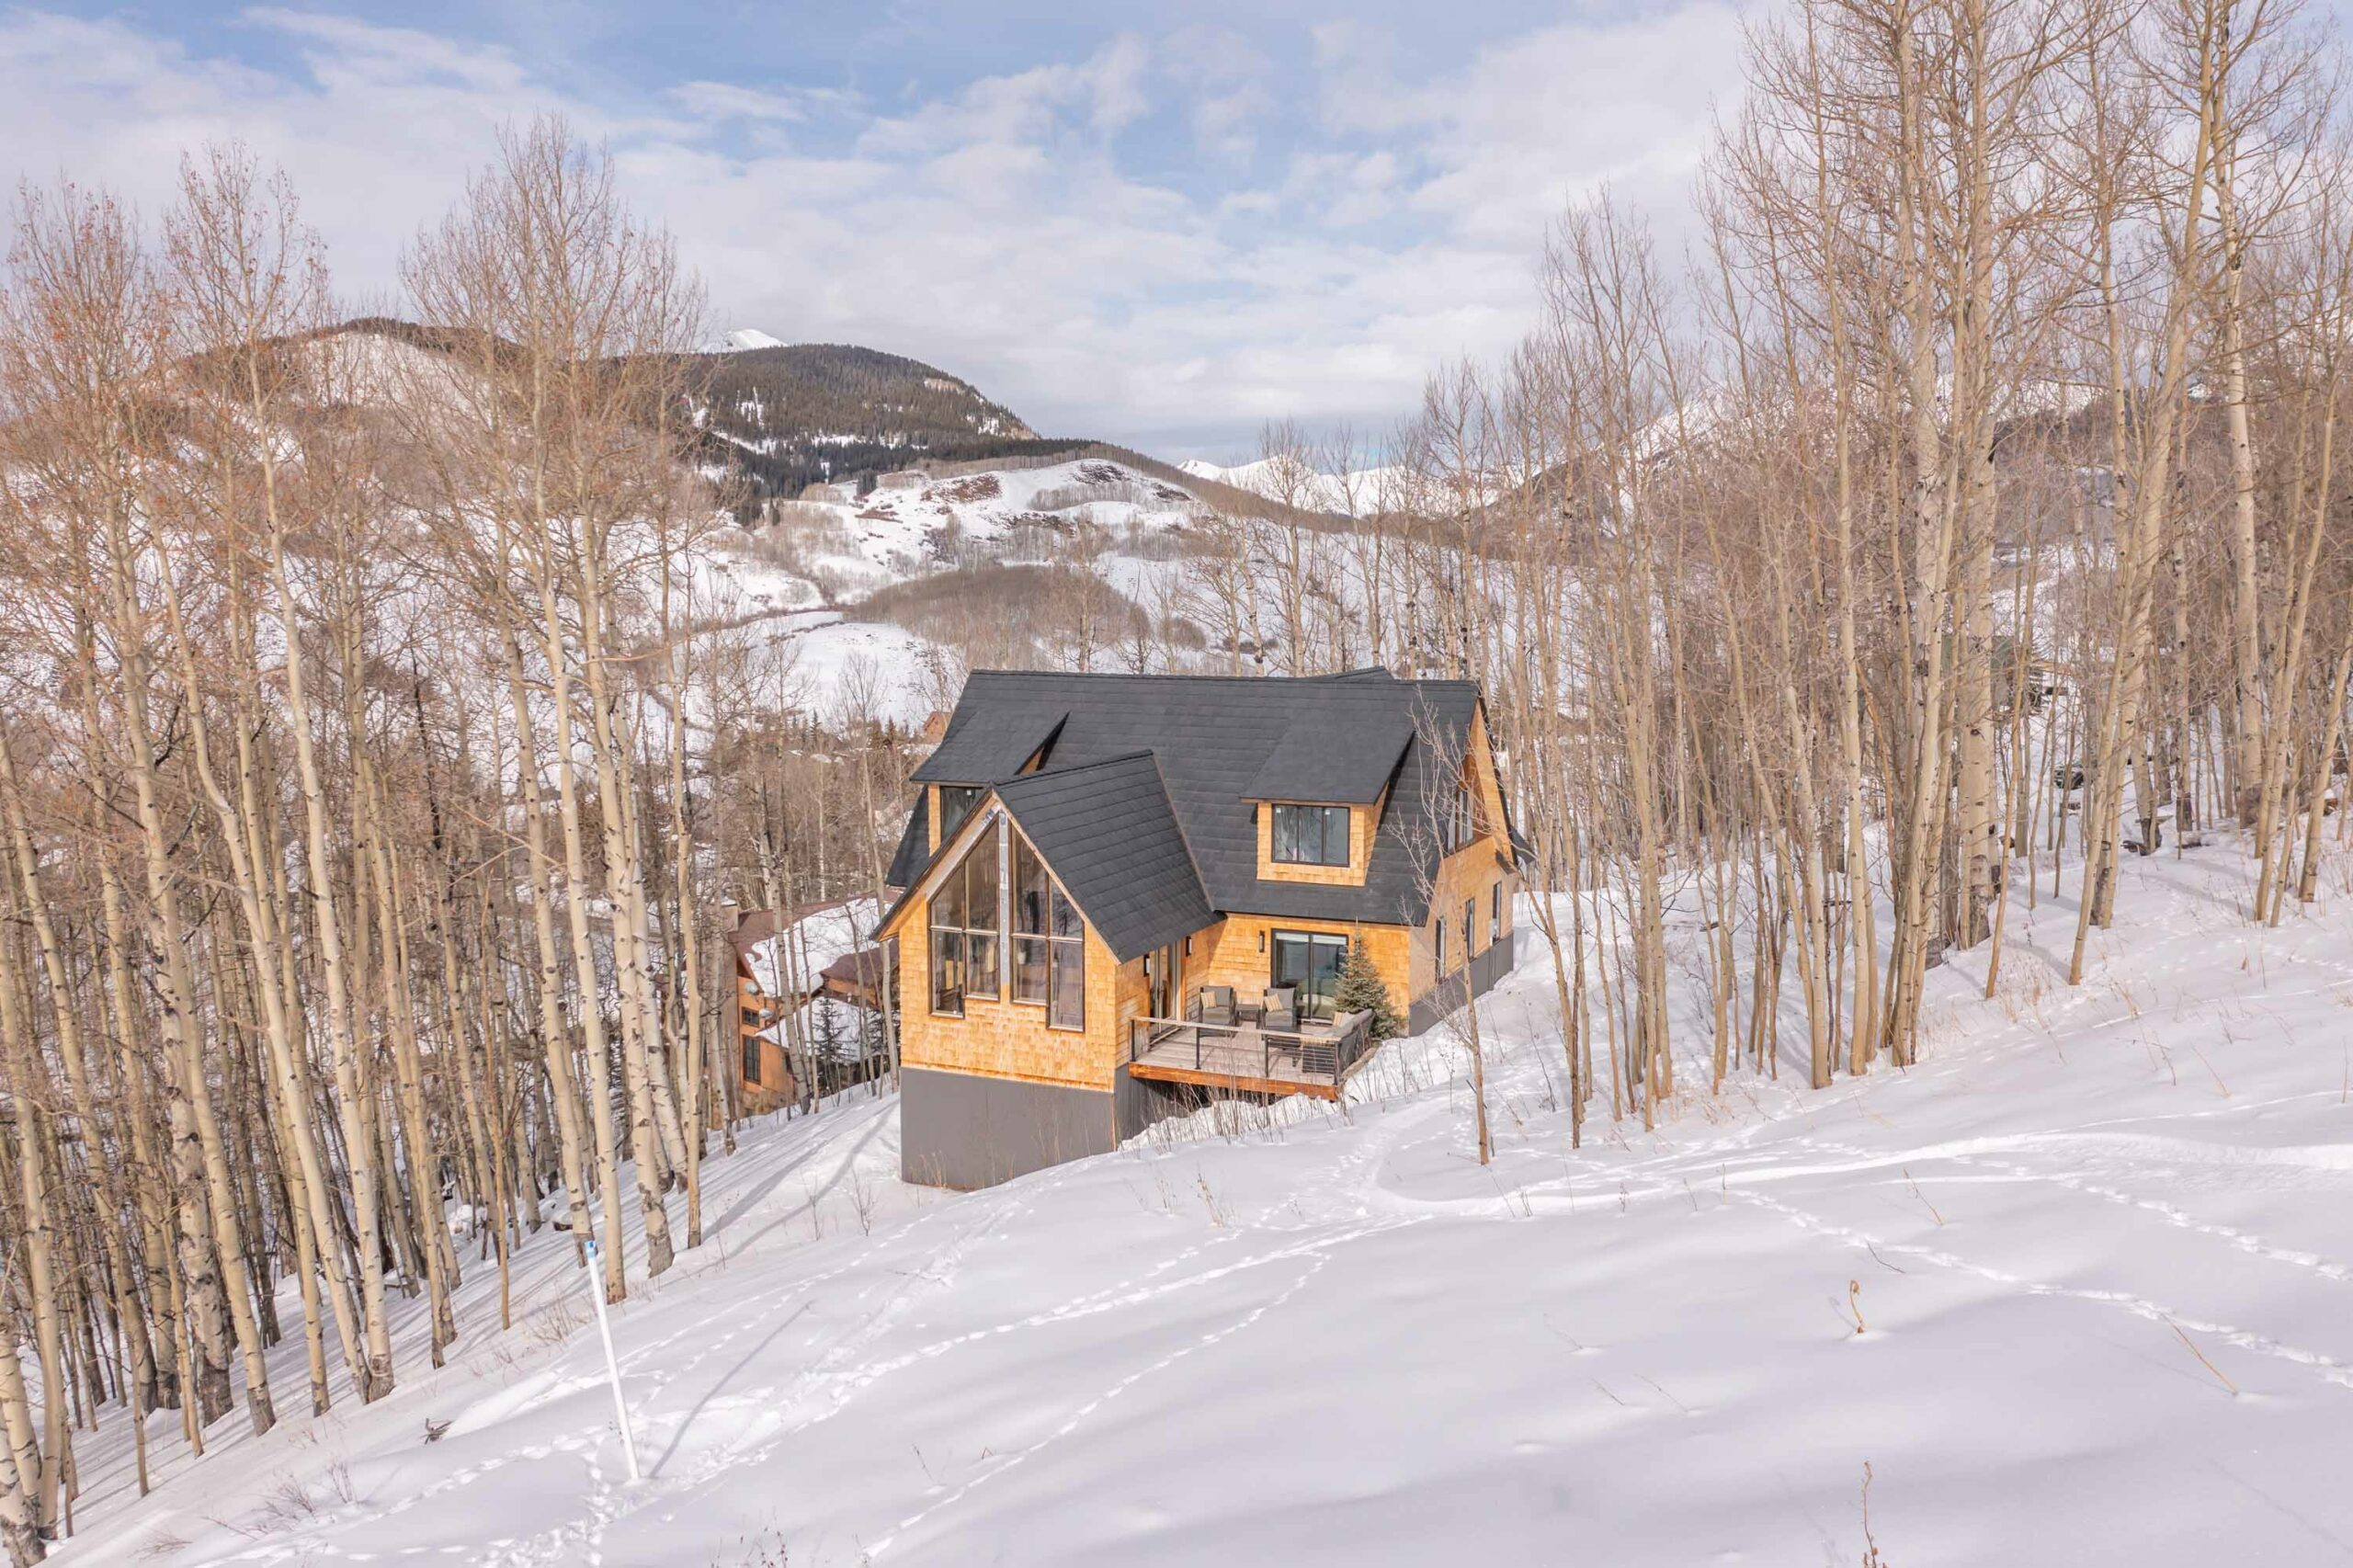 42 Ruby Drive Mt. Crested Butte, Colorado - back of property skier access